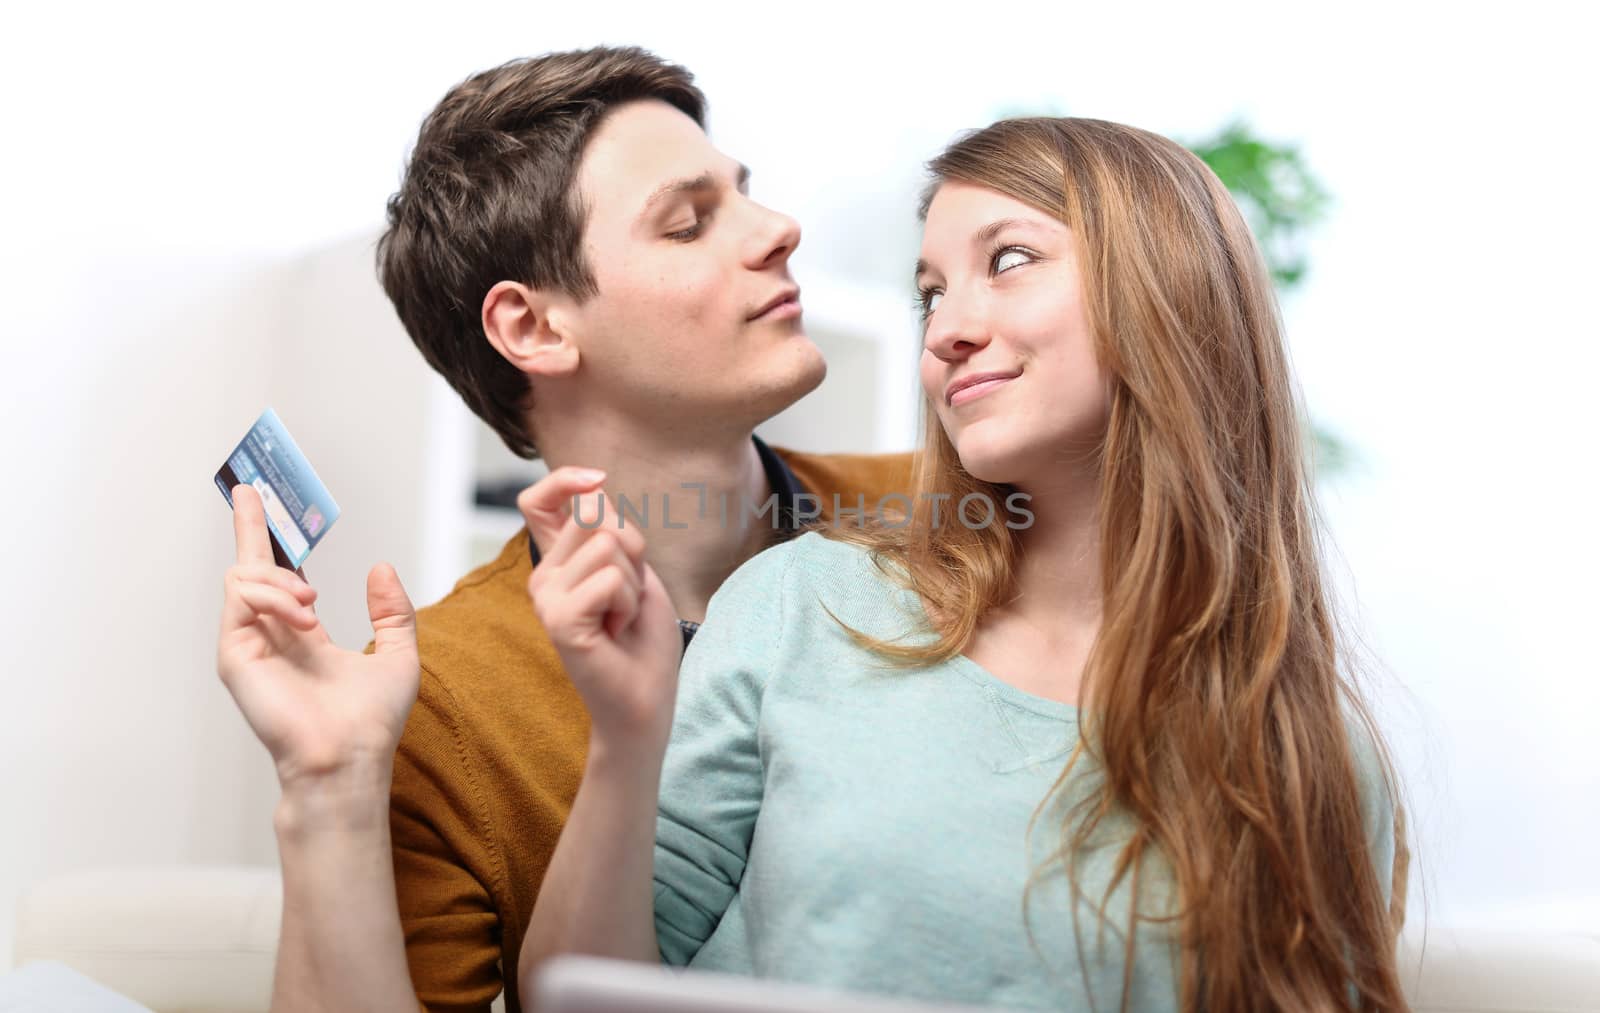 Funny smiling couple using credit card to Internet shop on-line by pixinoo